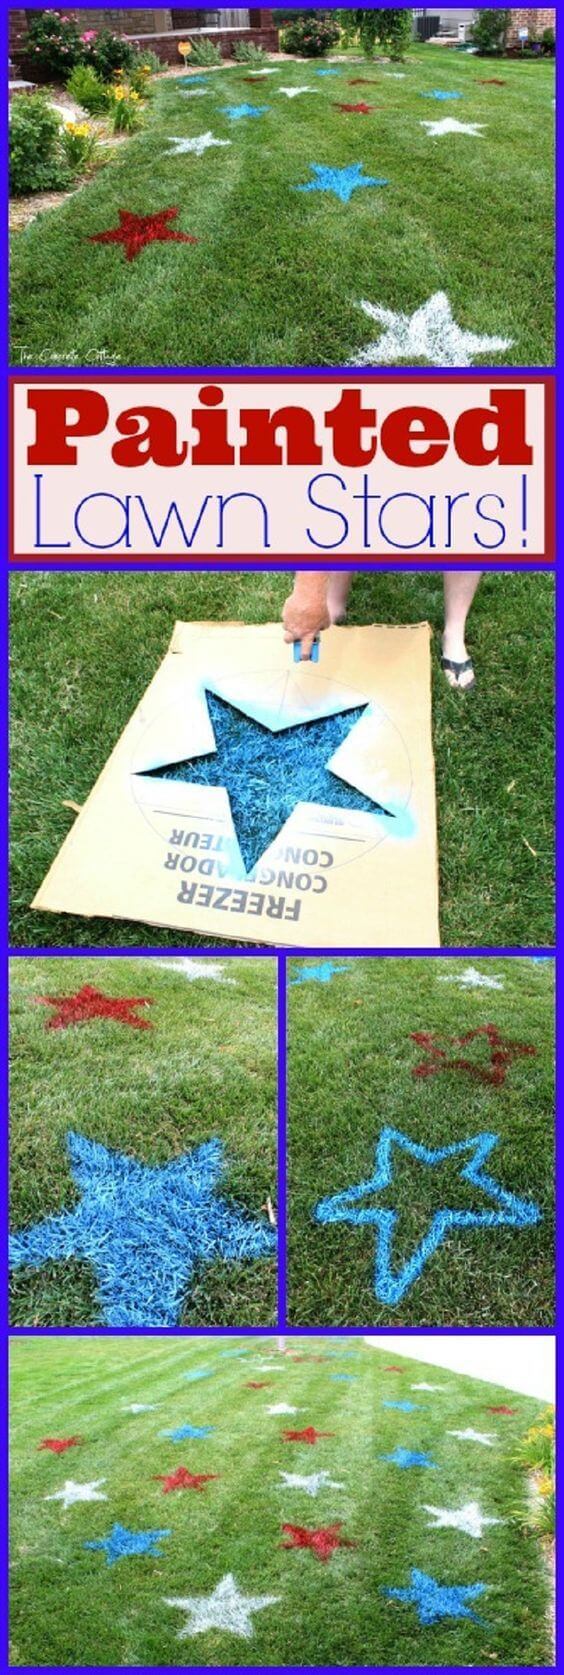 Painted lawn stars for the 4th of July